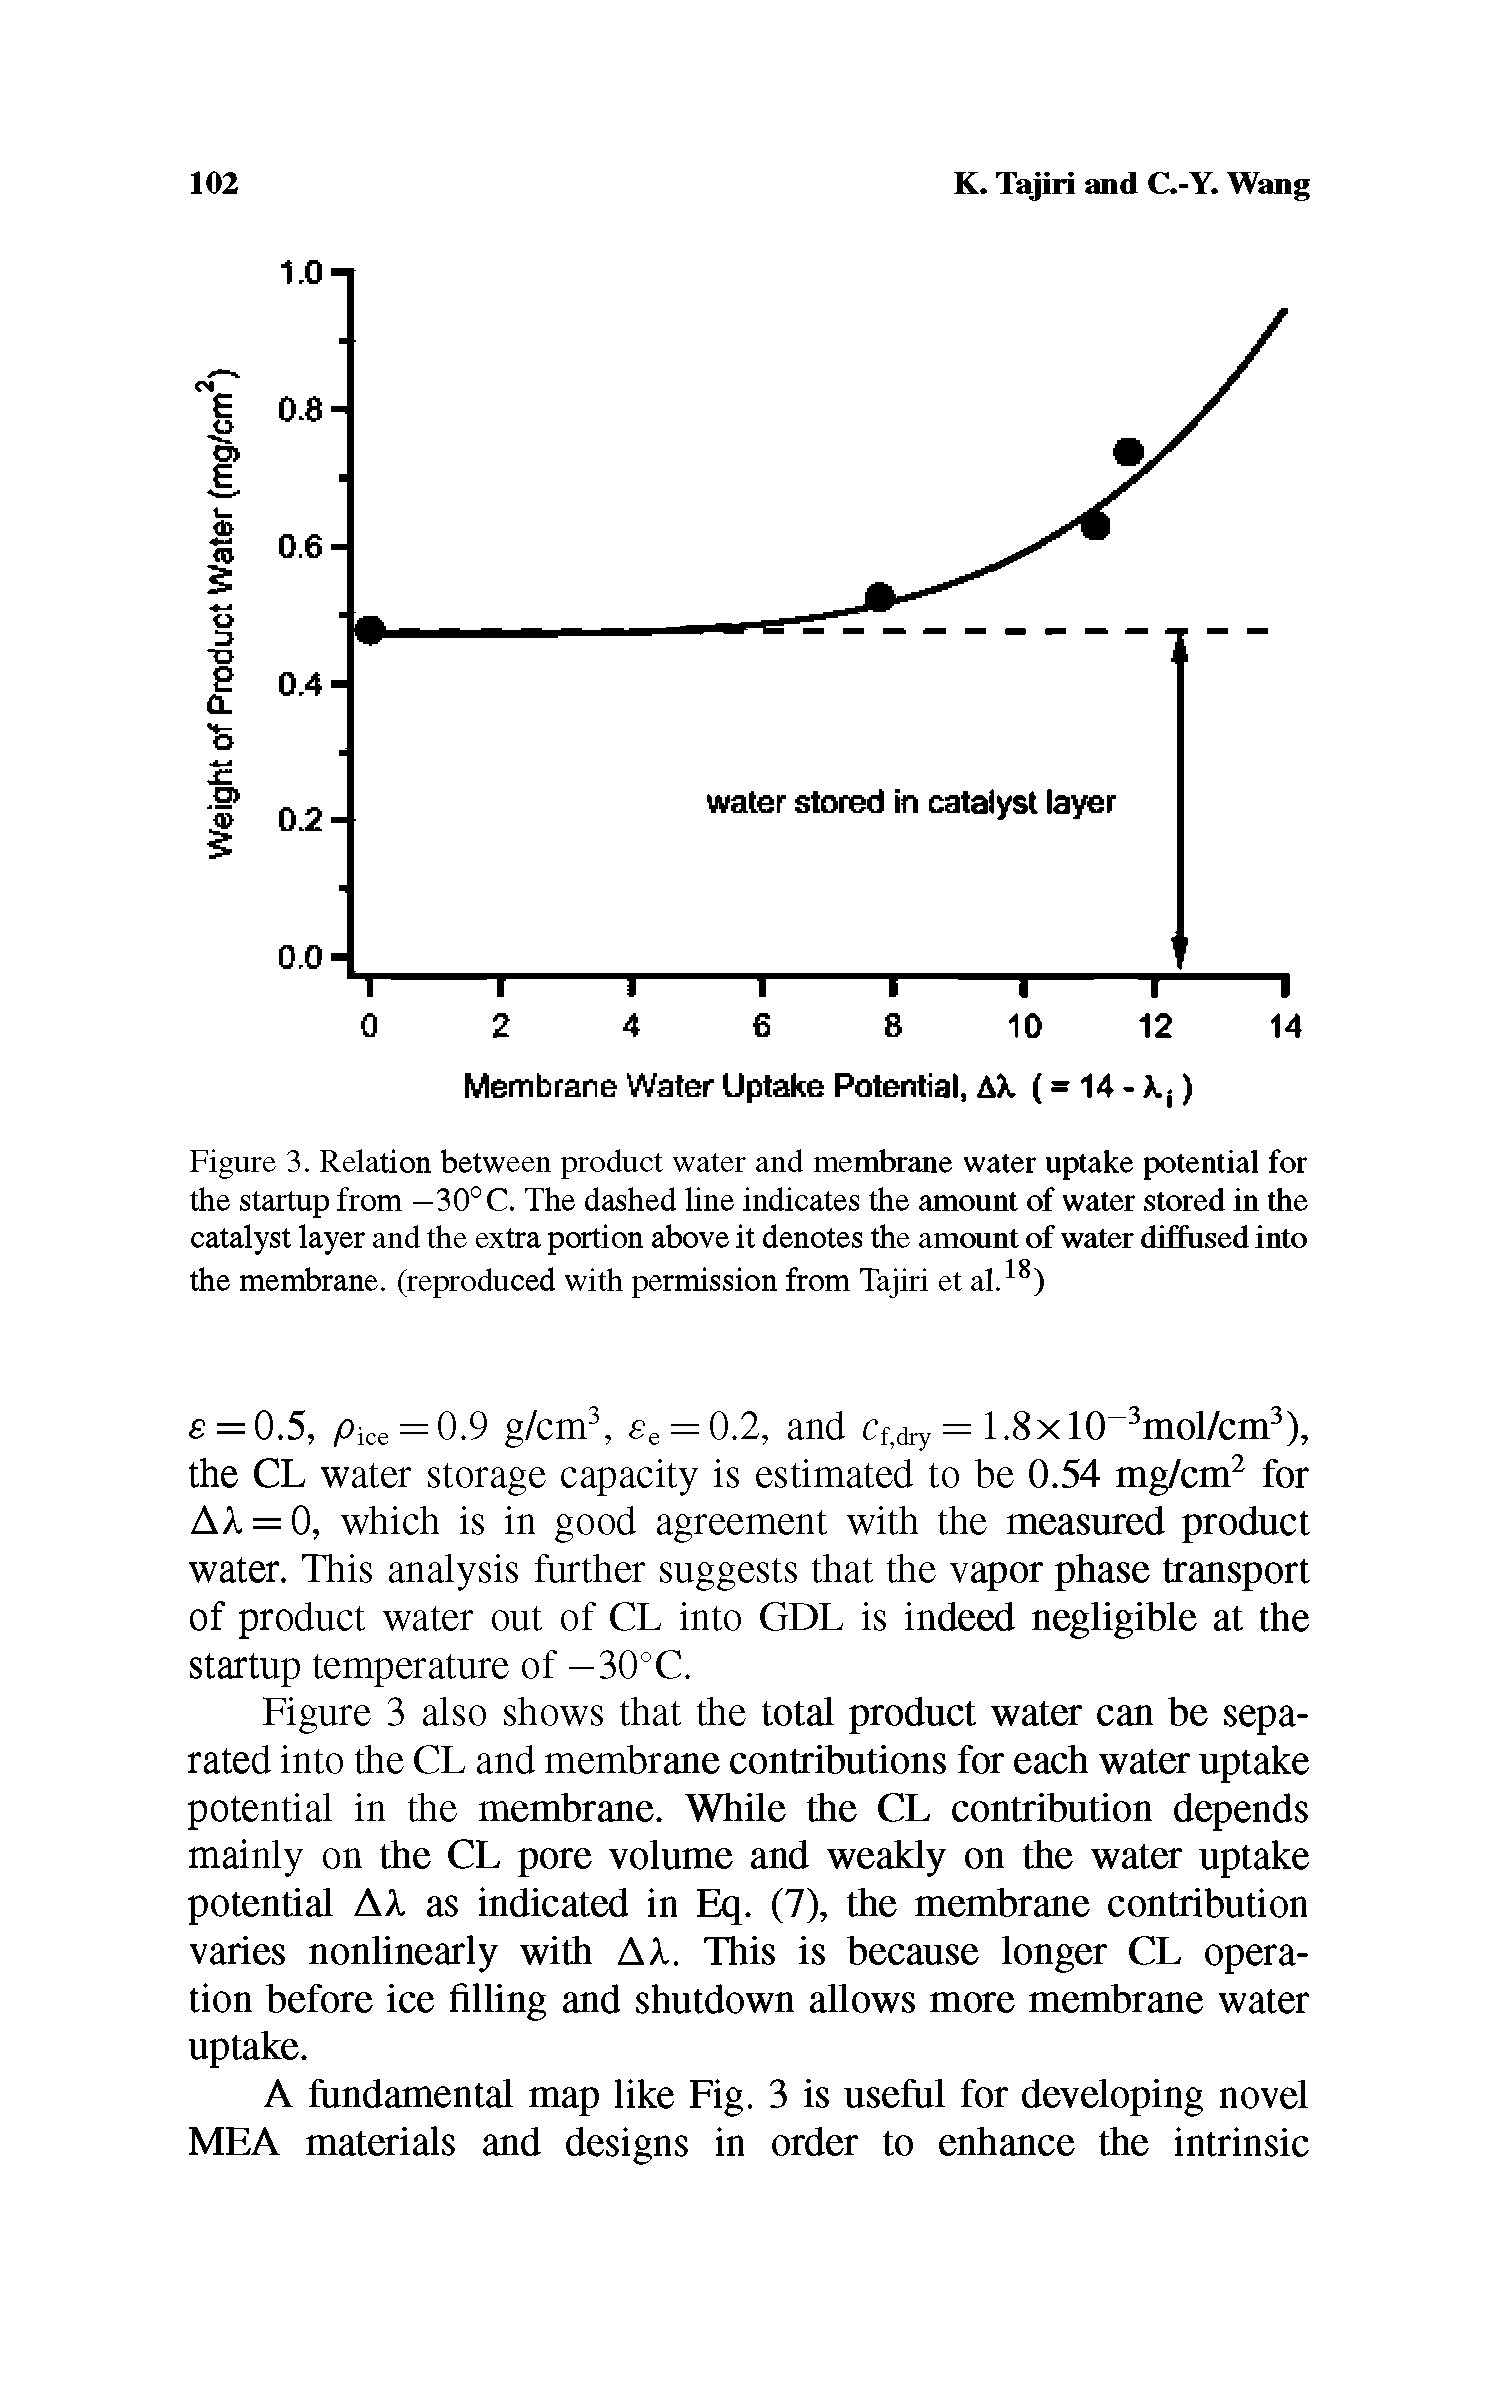 Figure 3. Relation between product water and membrane water uptake potential for the startup from — 30° C. The dashed line indicates the amount of water stored in the catalyst layer and the extra portion above it denotes the amount of water diffused into the membrane, (reproduced with permission from Tajiri et al.18)...